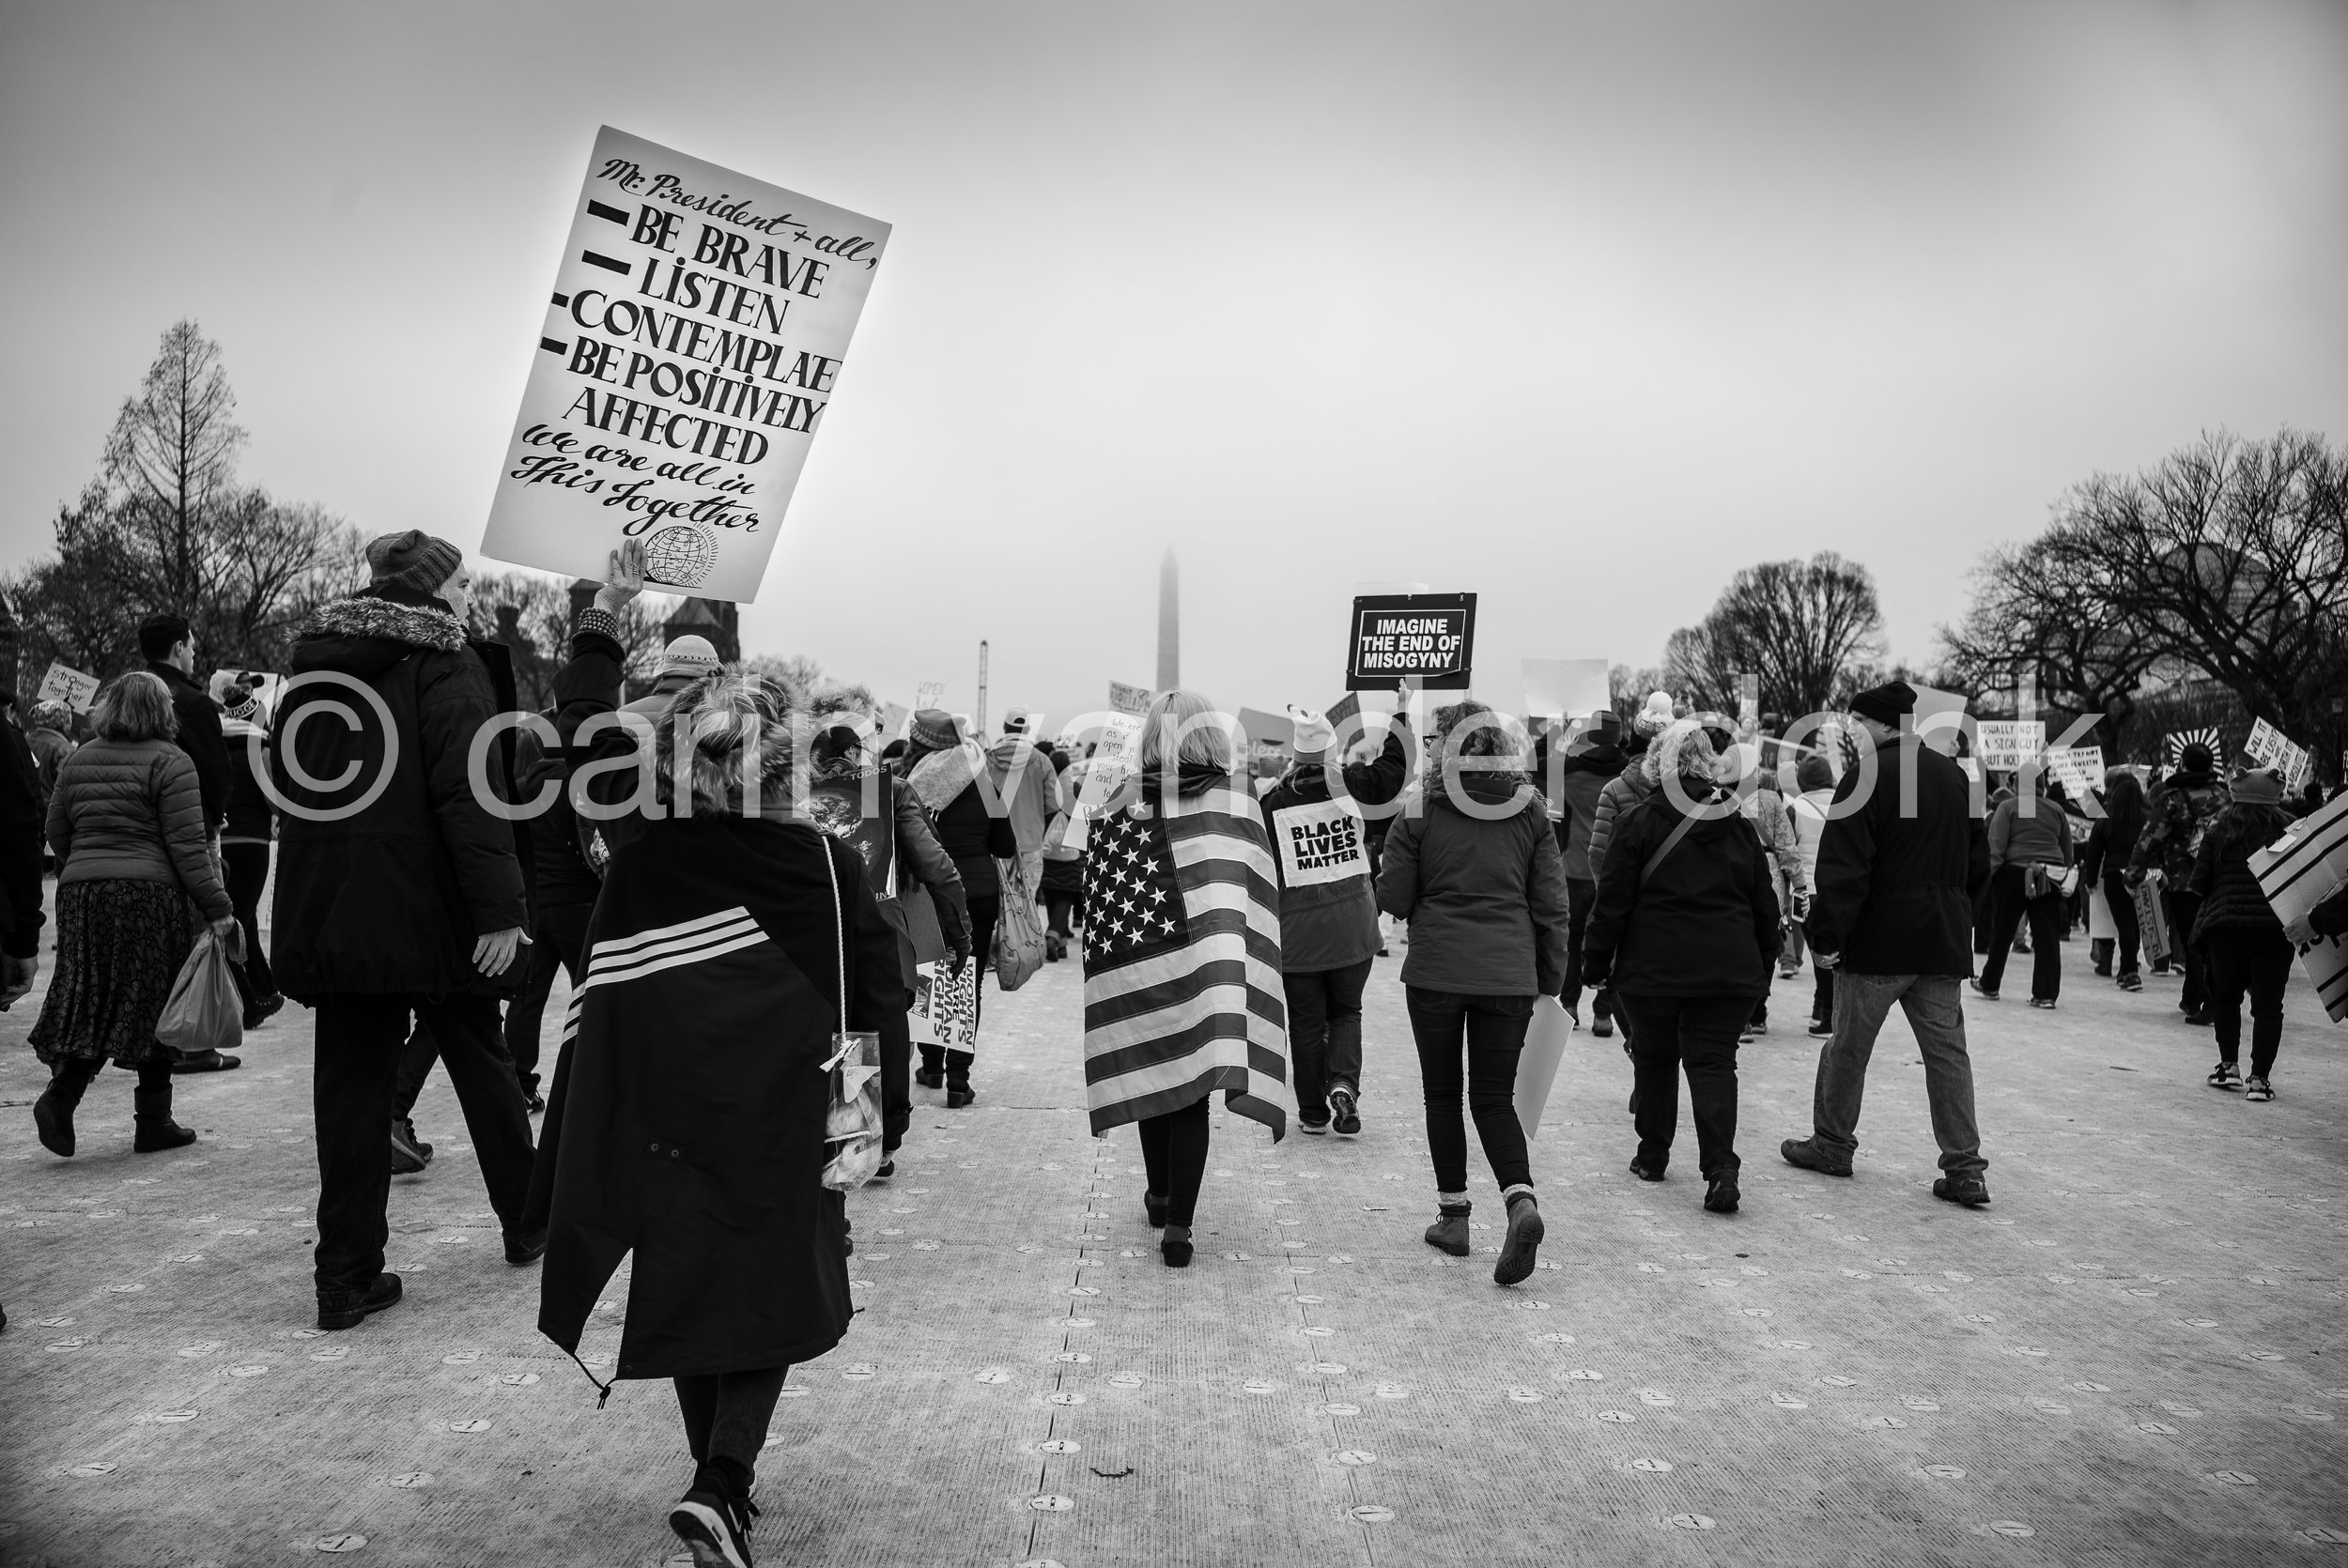 Womens March, January 21st, 2017 DC 8" x 12" by Carin van der Donk